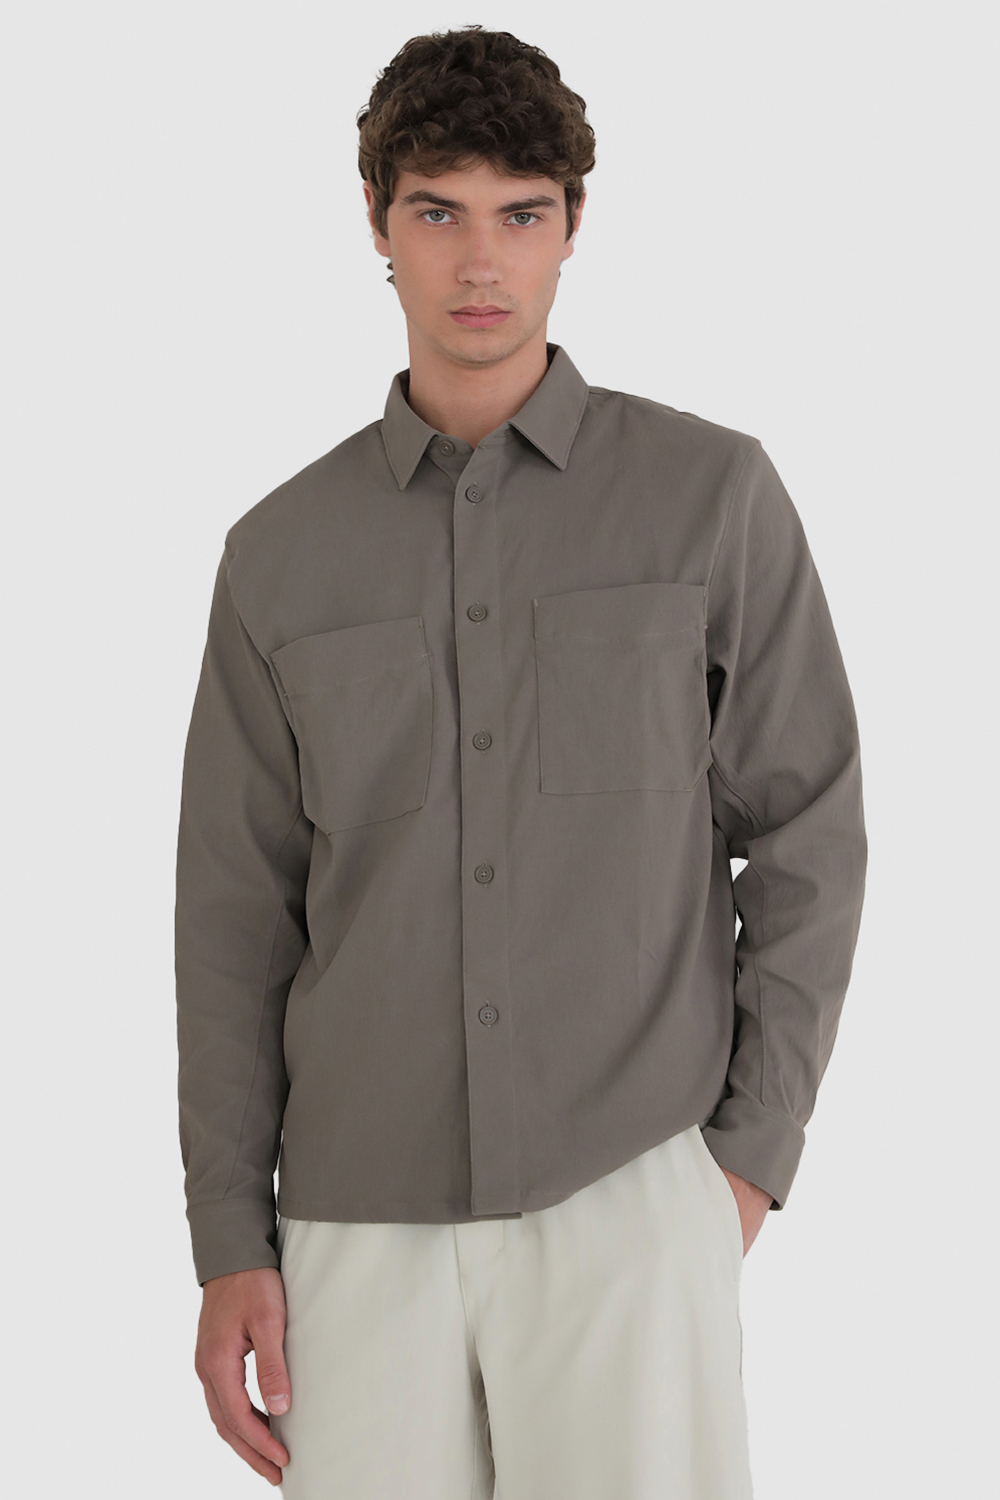  Relaxed-Fit Long Sleeve Button- Up LULULEMON